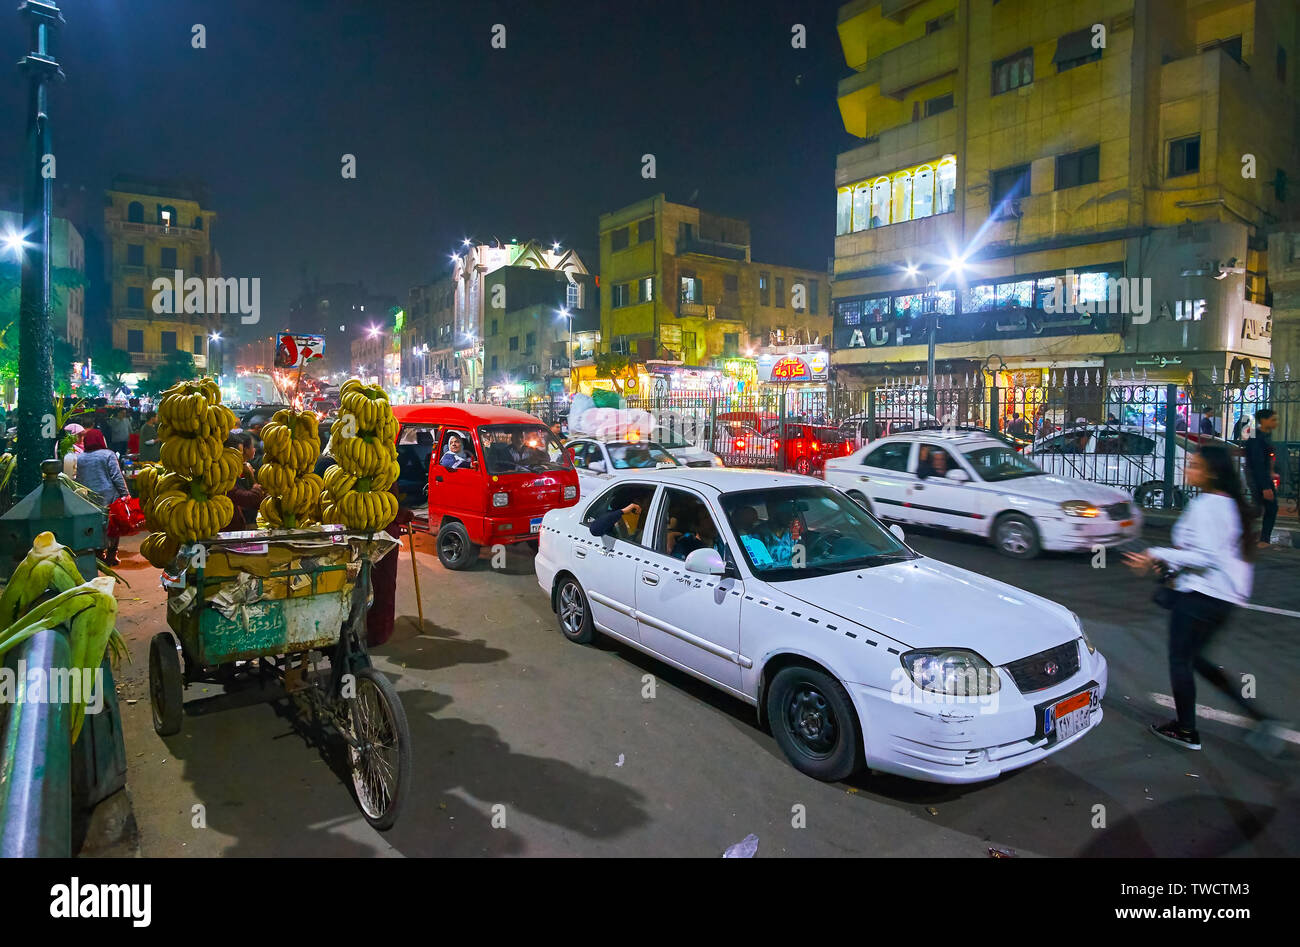 CAIRO, EGYPT - DECEMBER 22, 2017: The heavy evening traffic in Al Azhar avenue, full of stores, small stalls of old market and street vendors with the Stock Photo